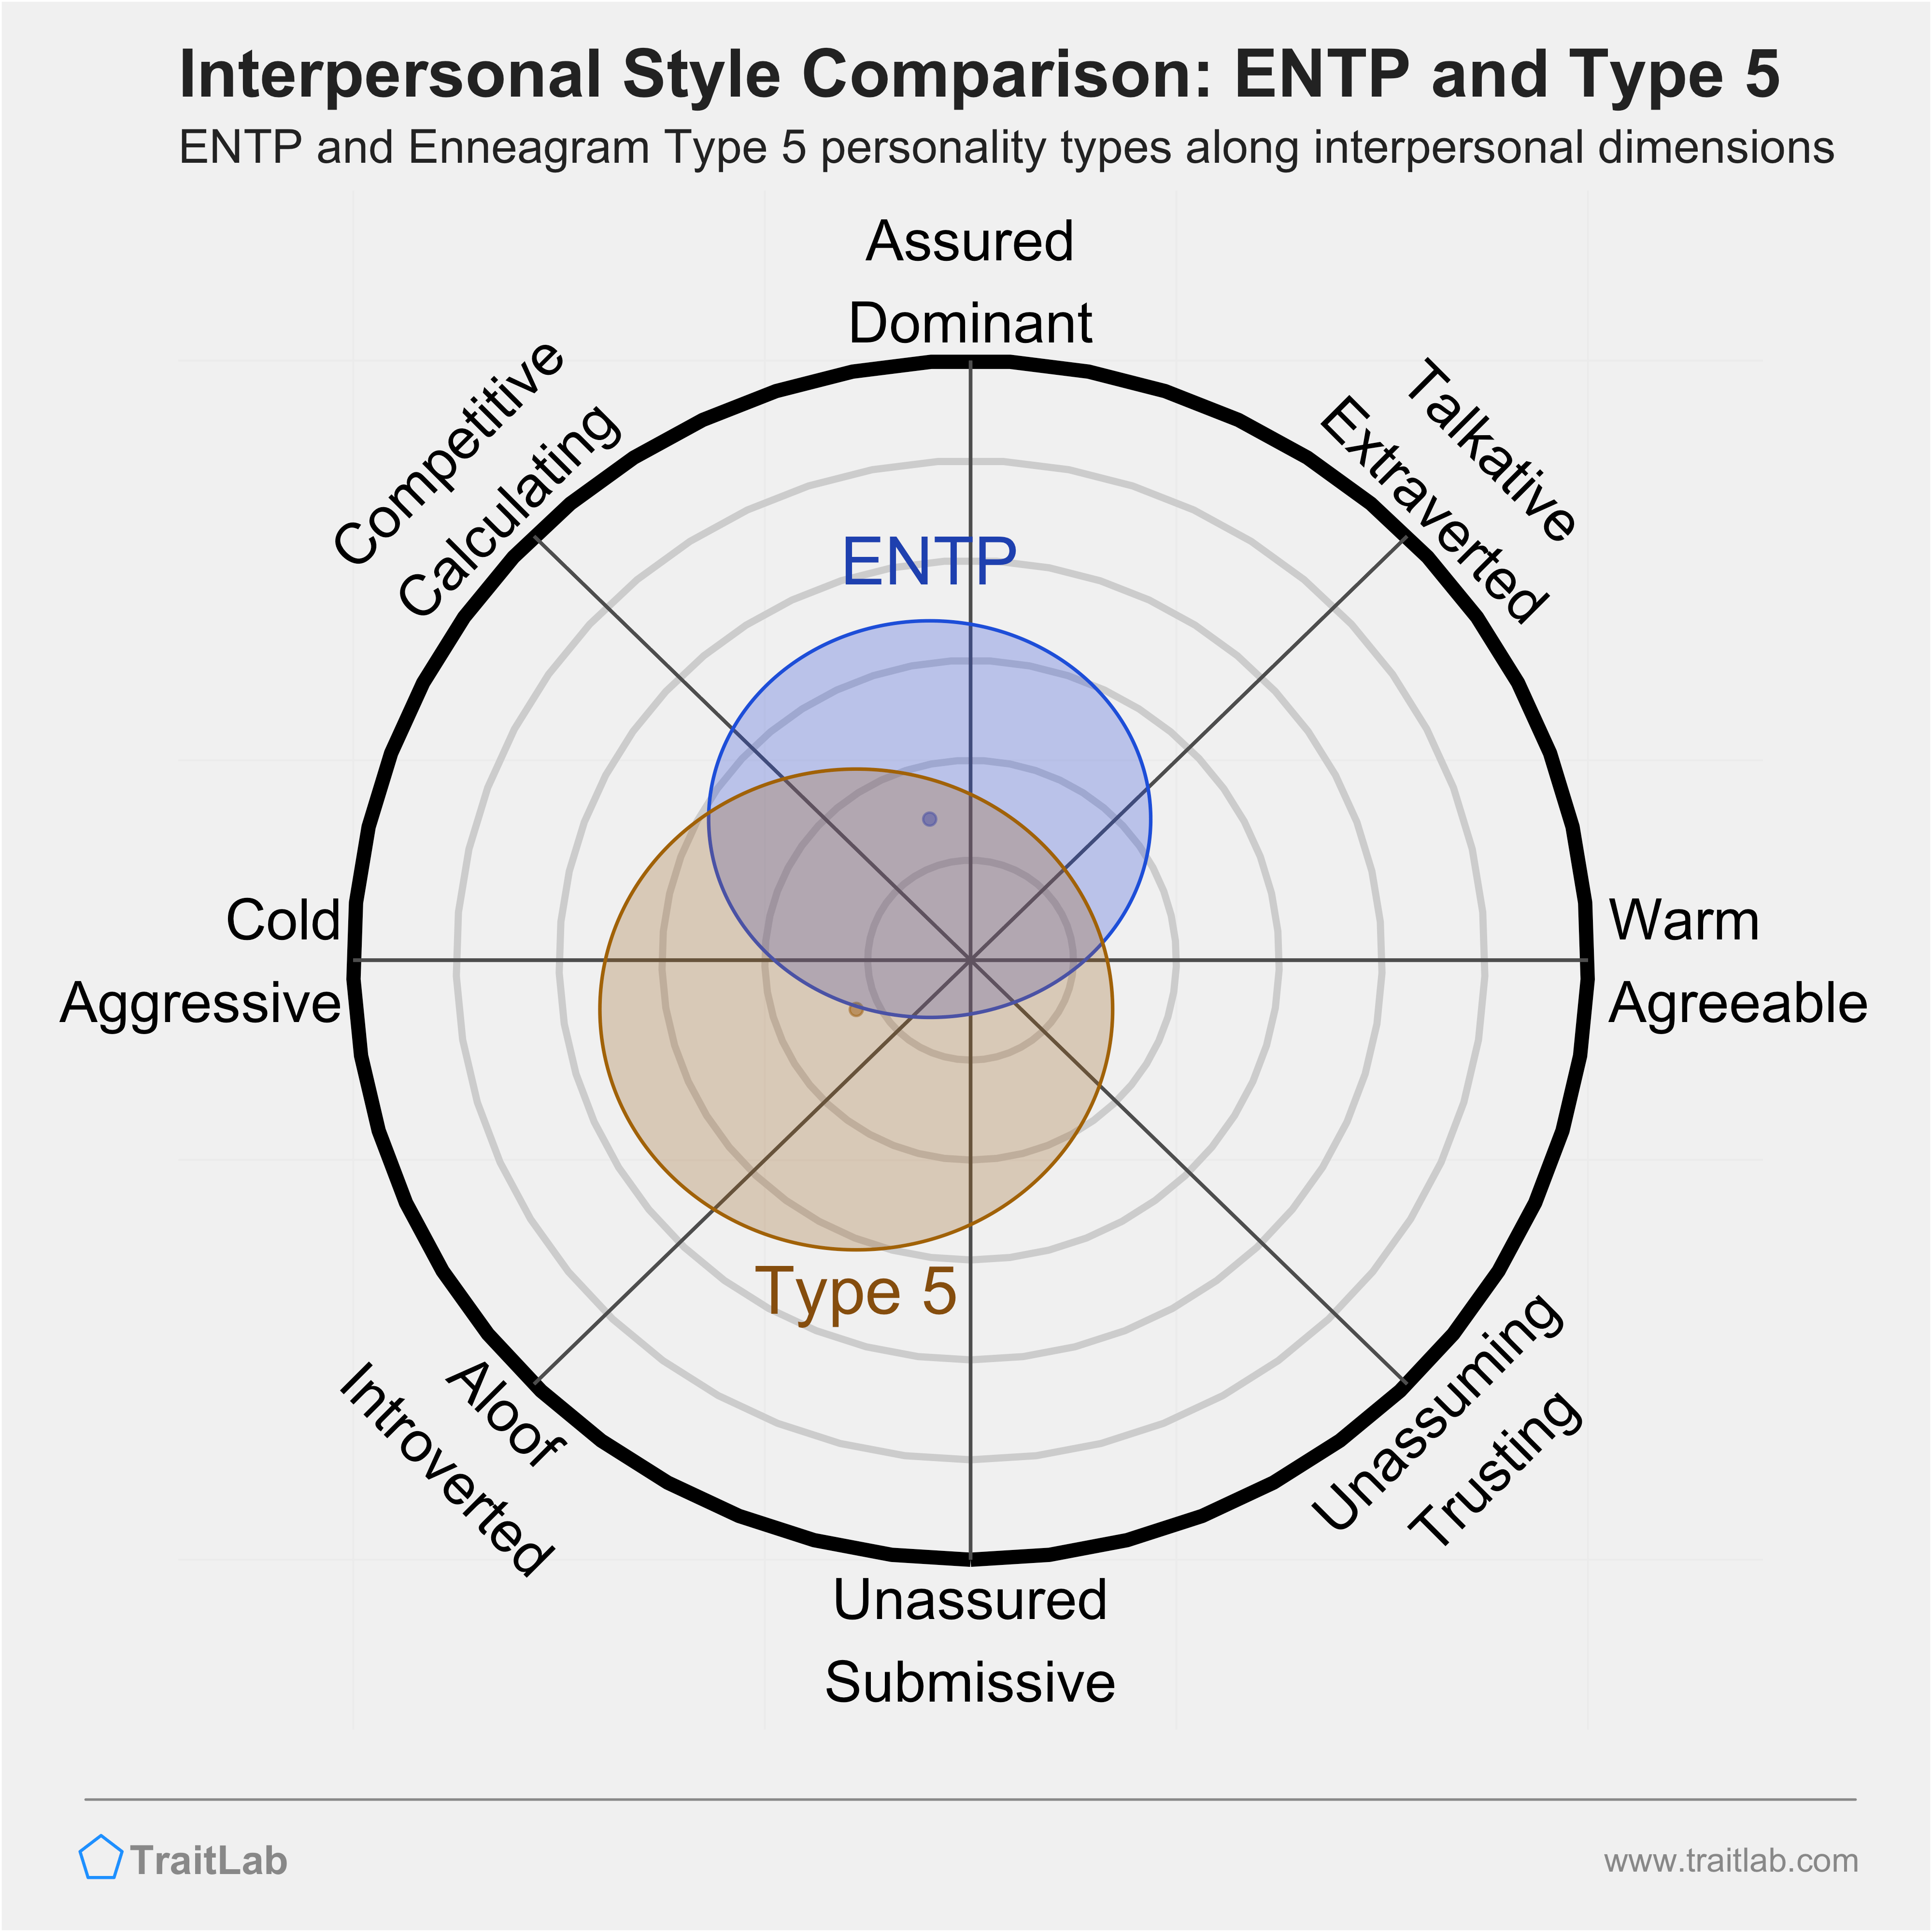 Enneagram ENTP and Type 5 comparison across interpersonal dimensions